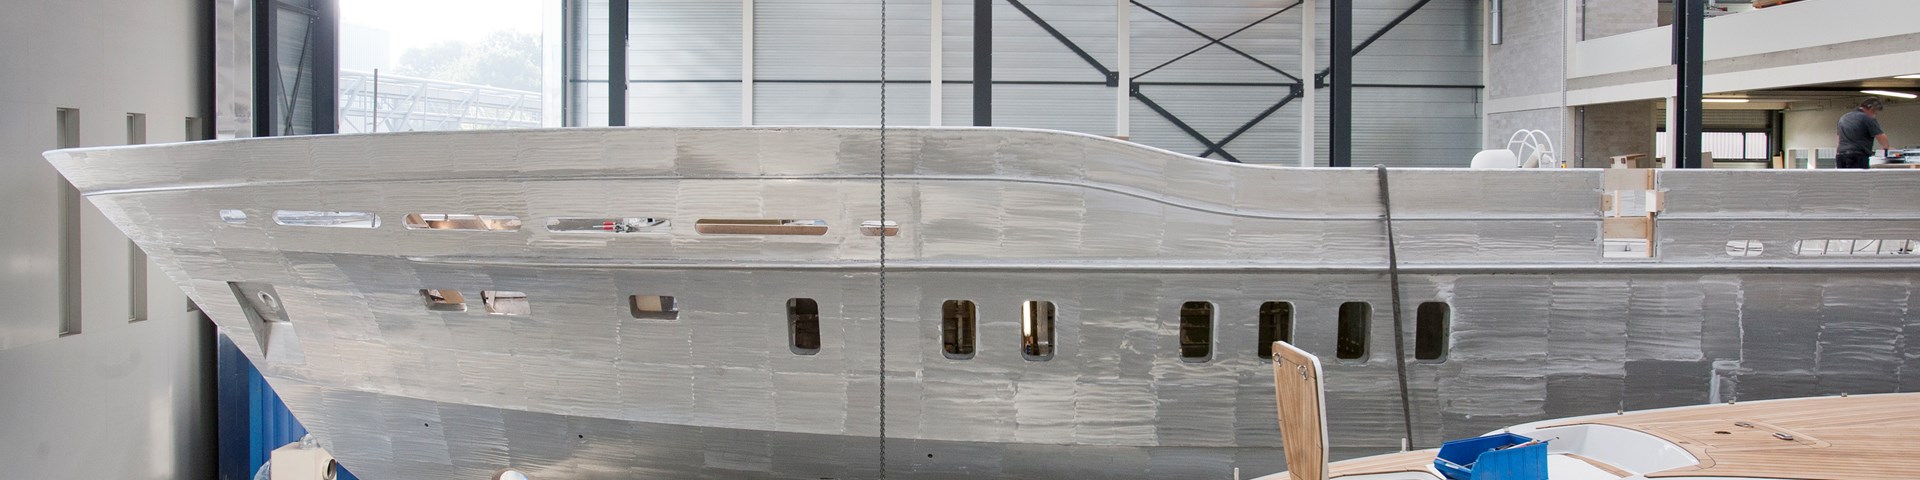 Boats in a boatbuilding warehouse